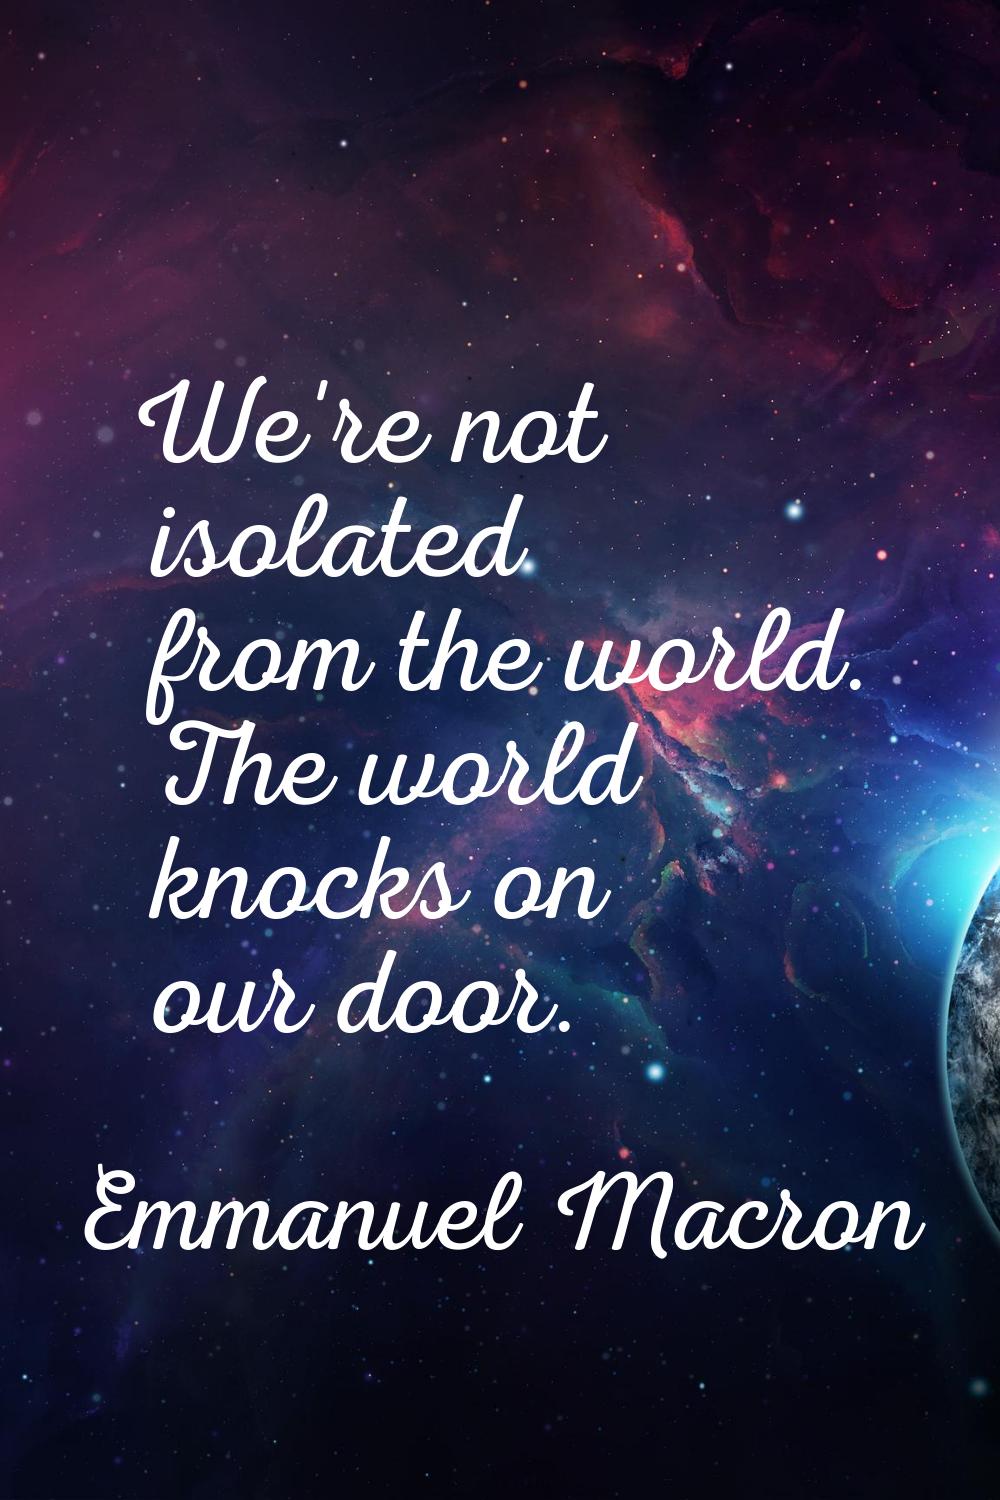 We're not isolated from the world. The world knocks on our door.